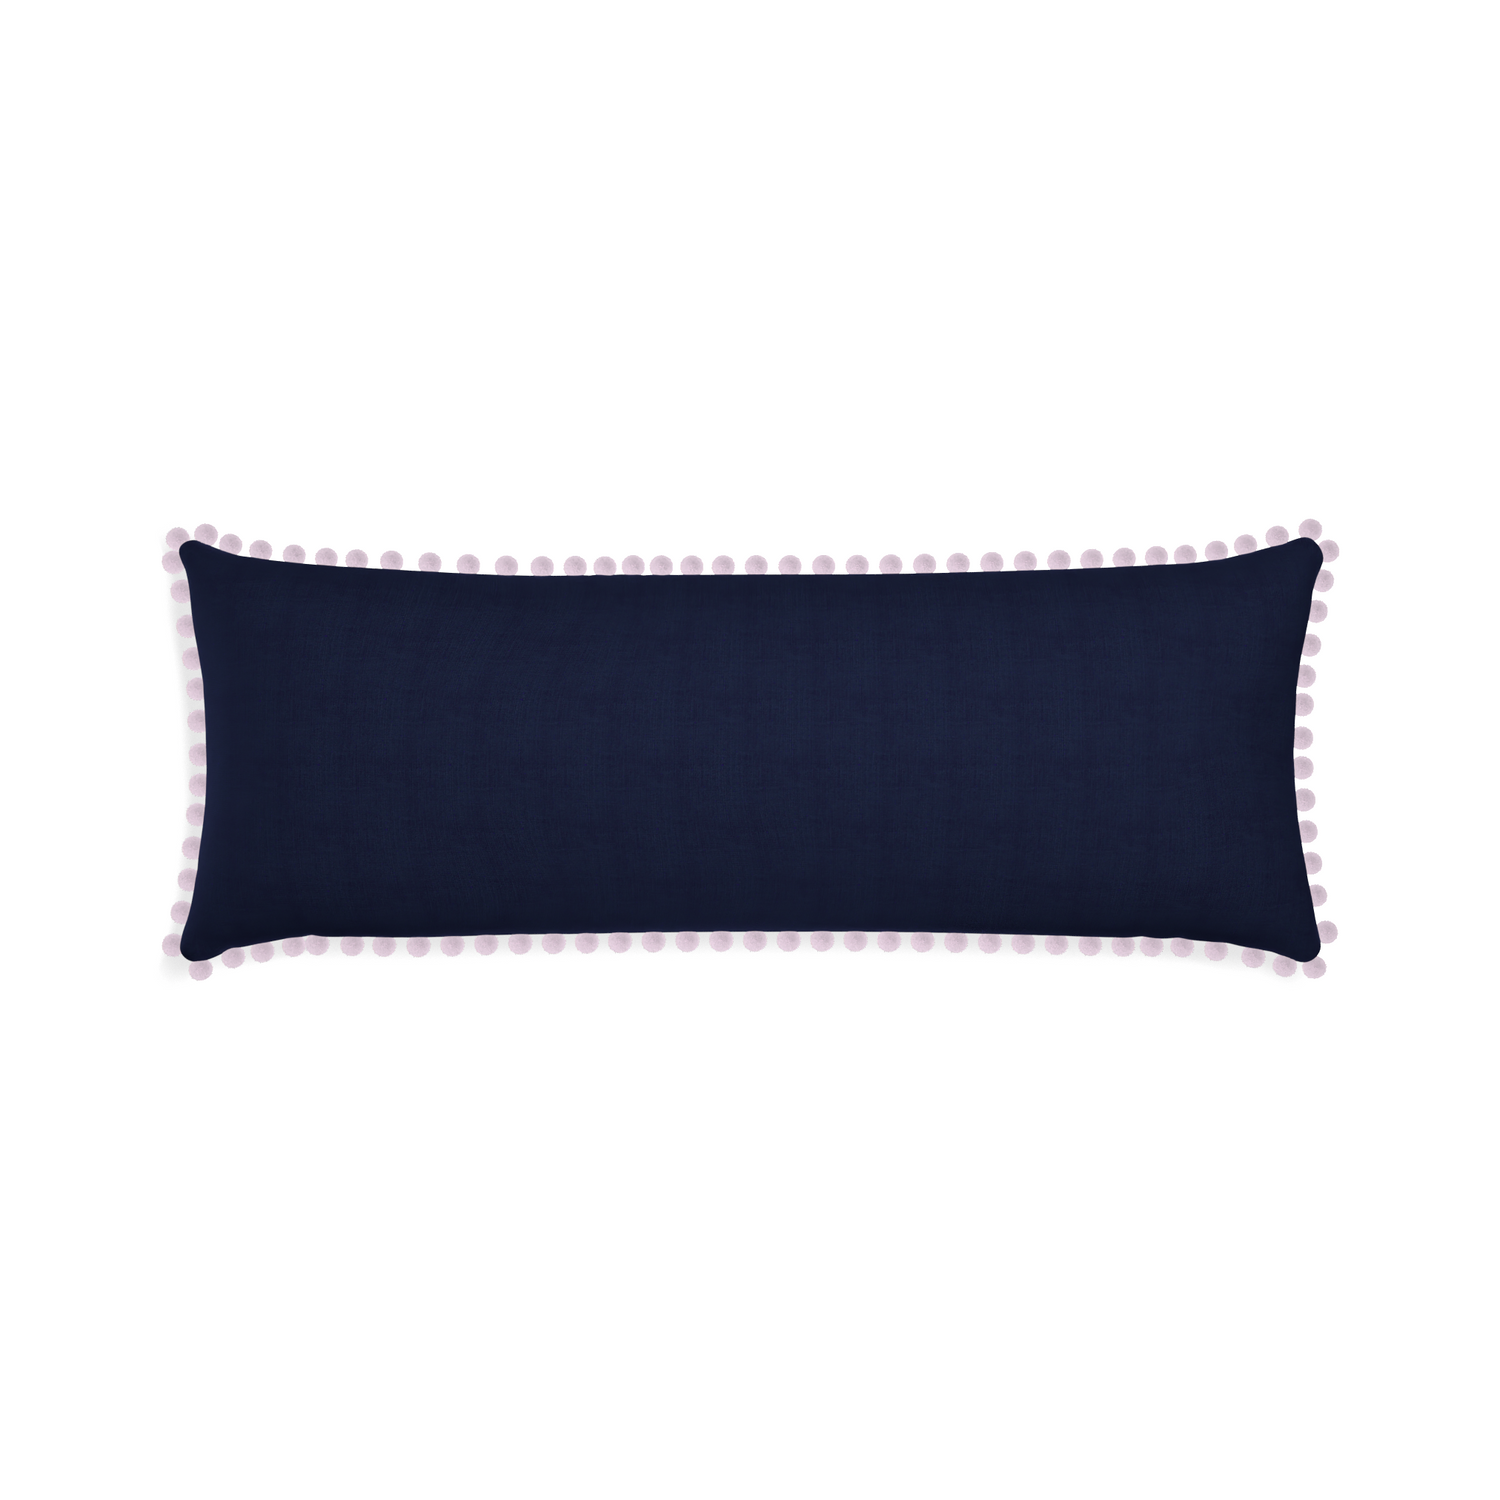 Xl-lumbar midnight custom pillow with l on white background